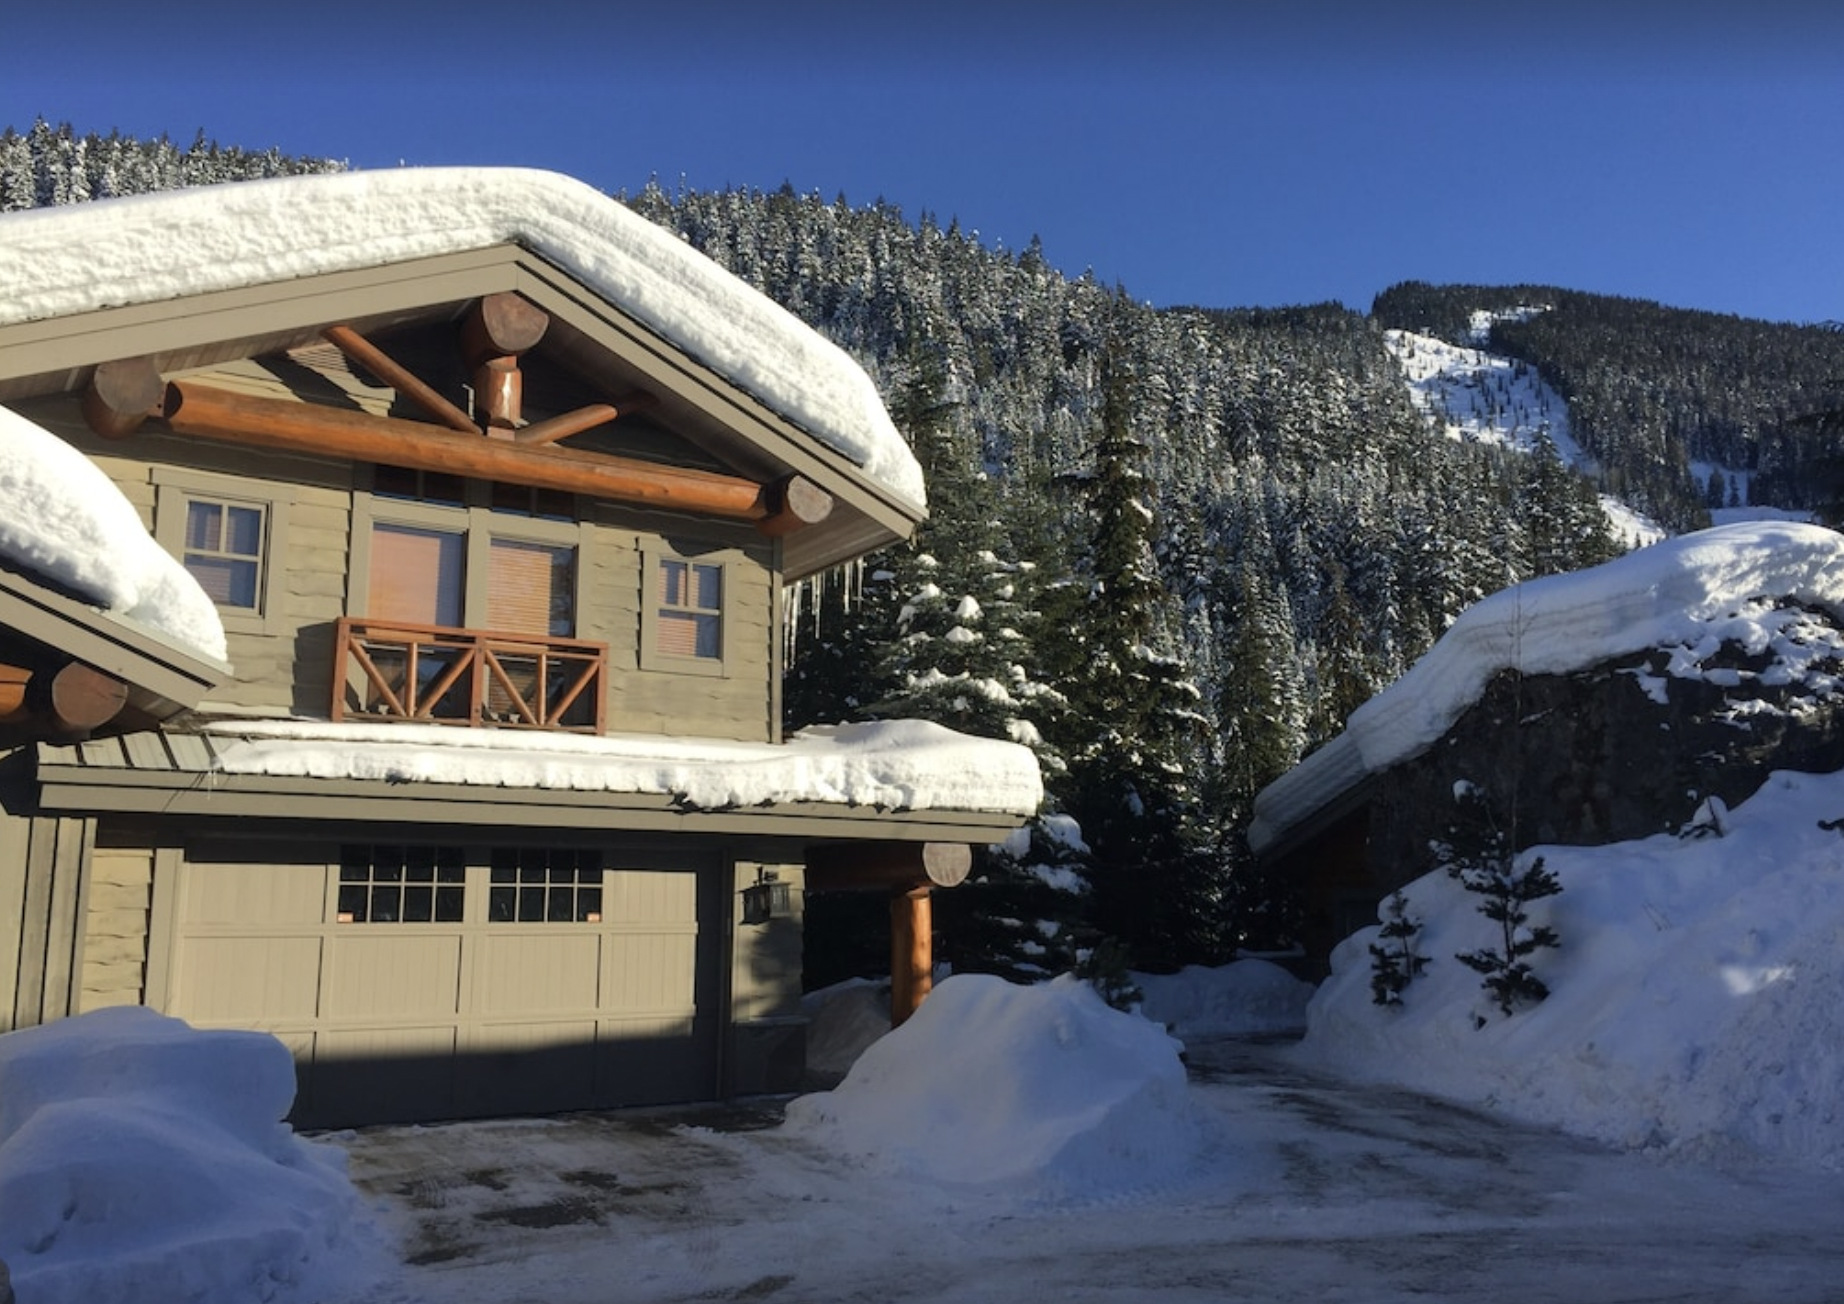 Snow covering The Heights Vrbo rental in Whistler